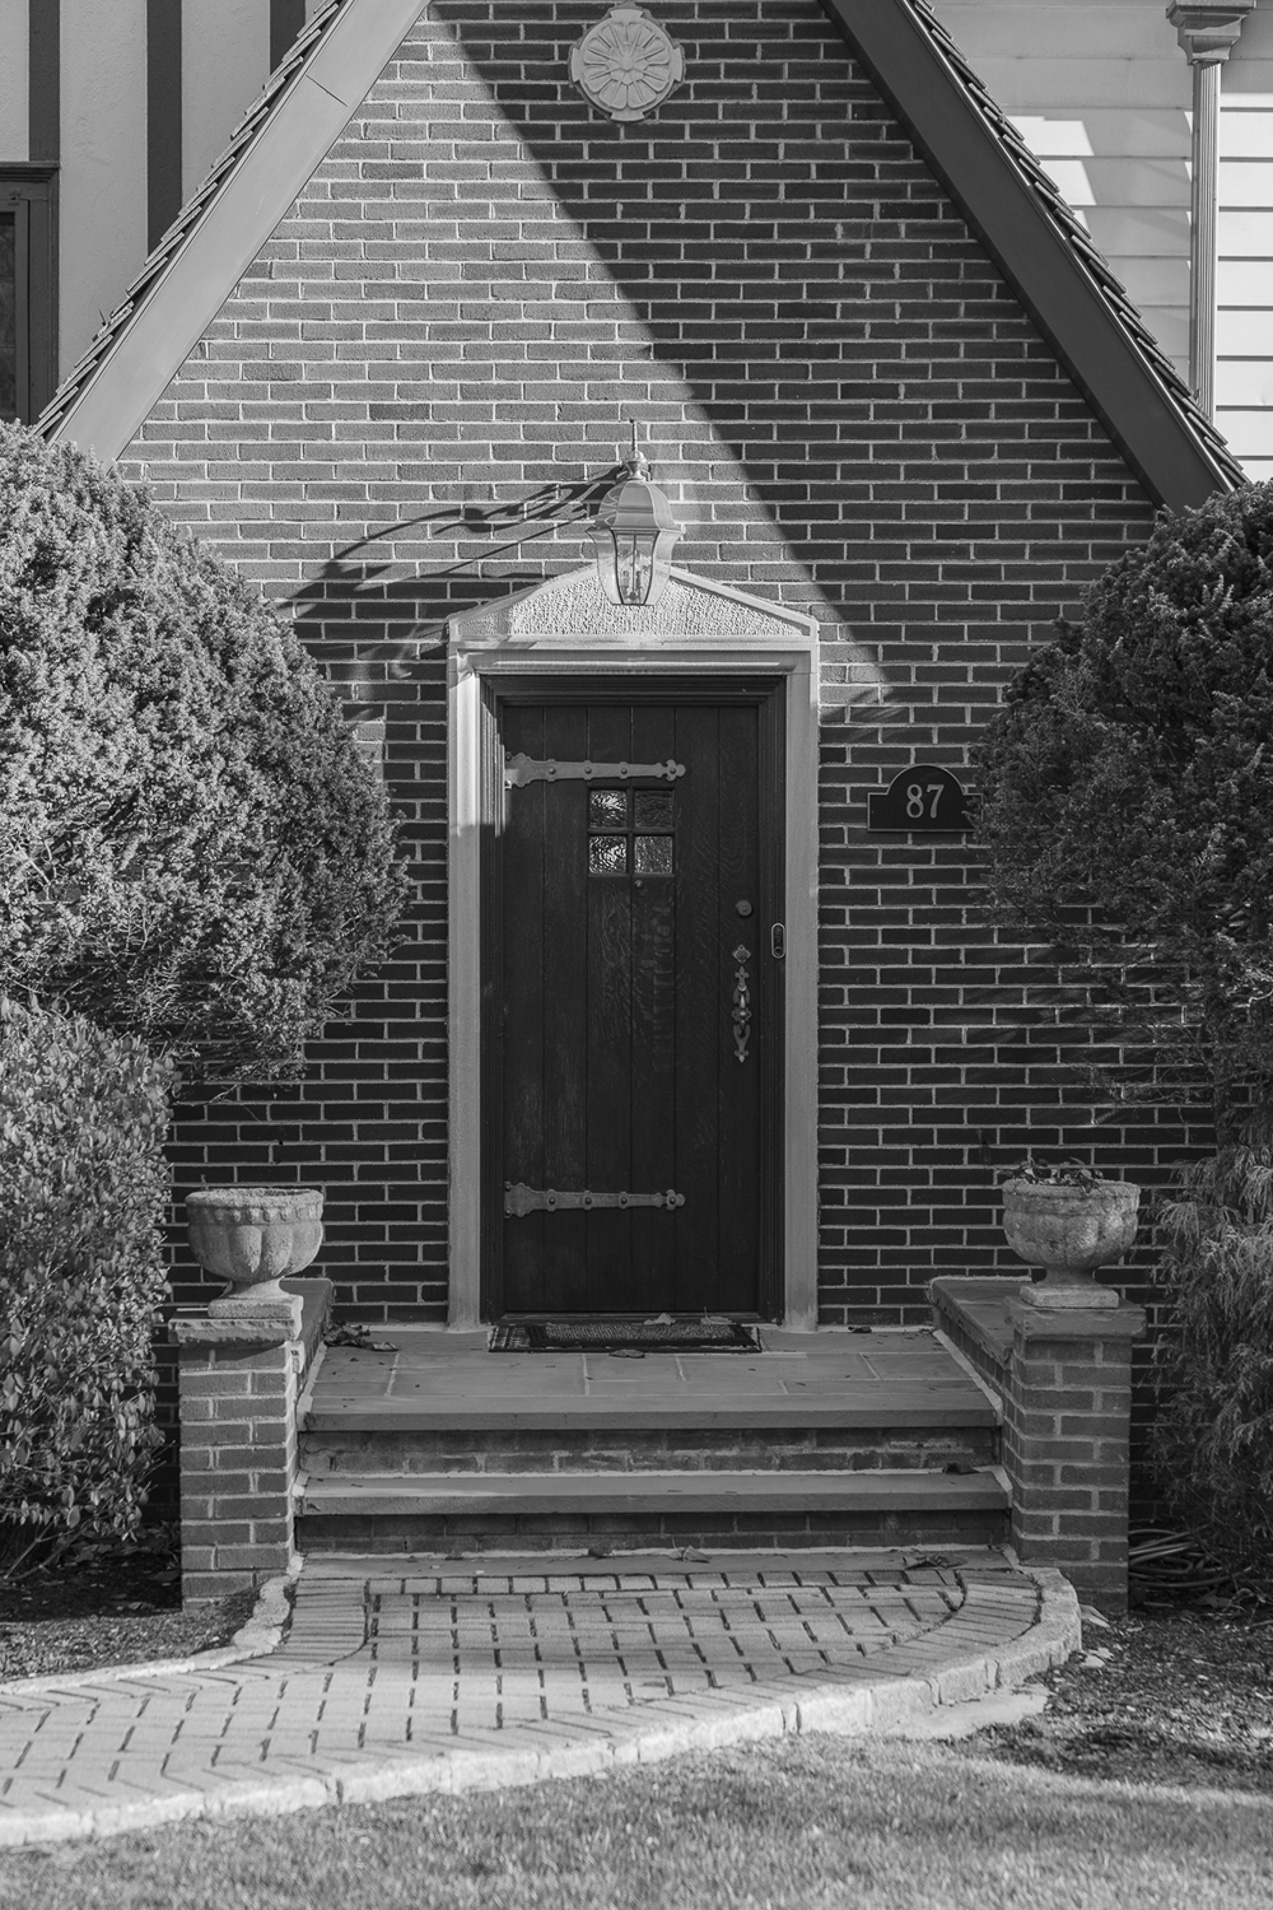 The doorway to a house the street number which is 87